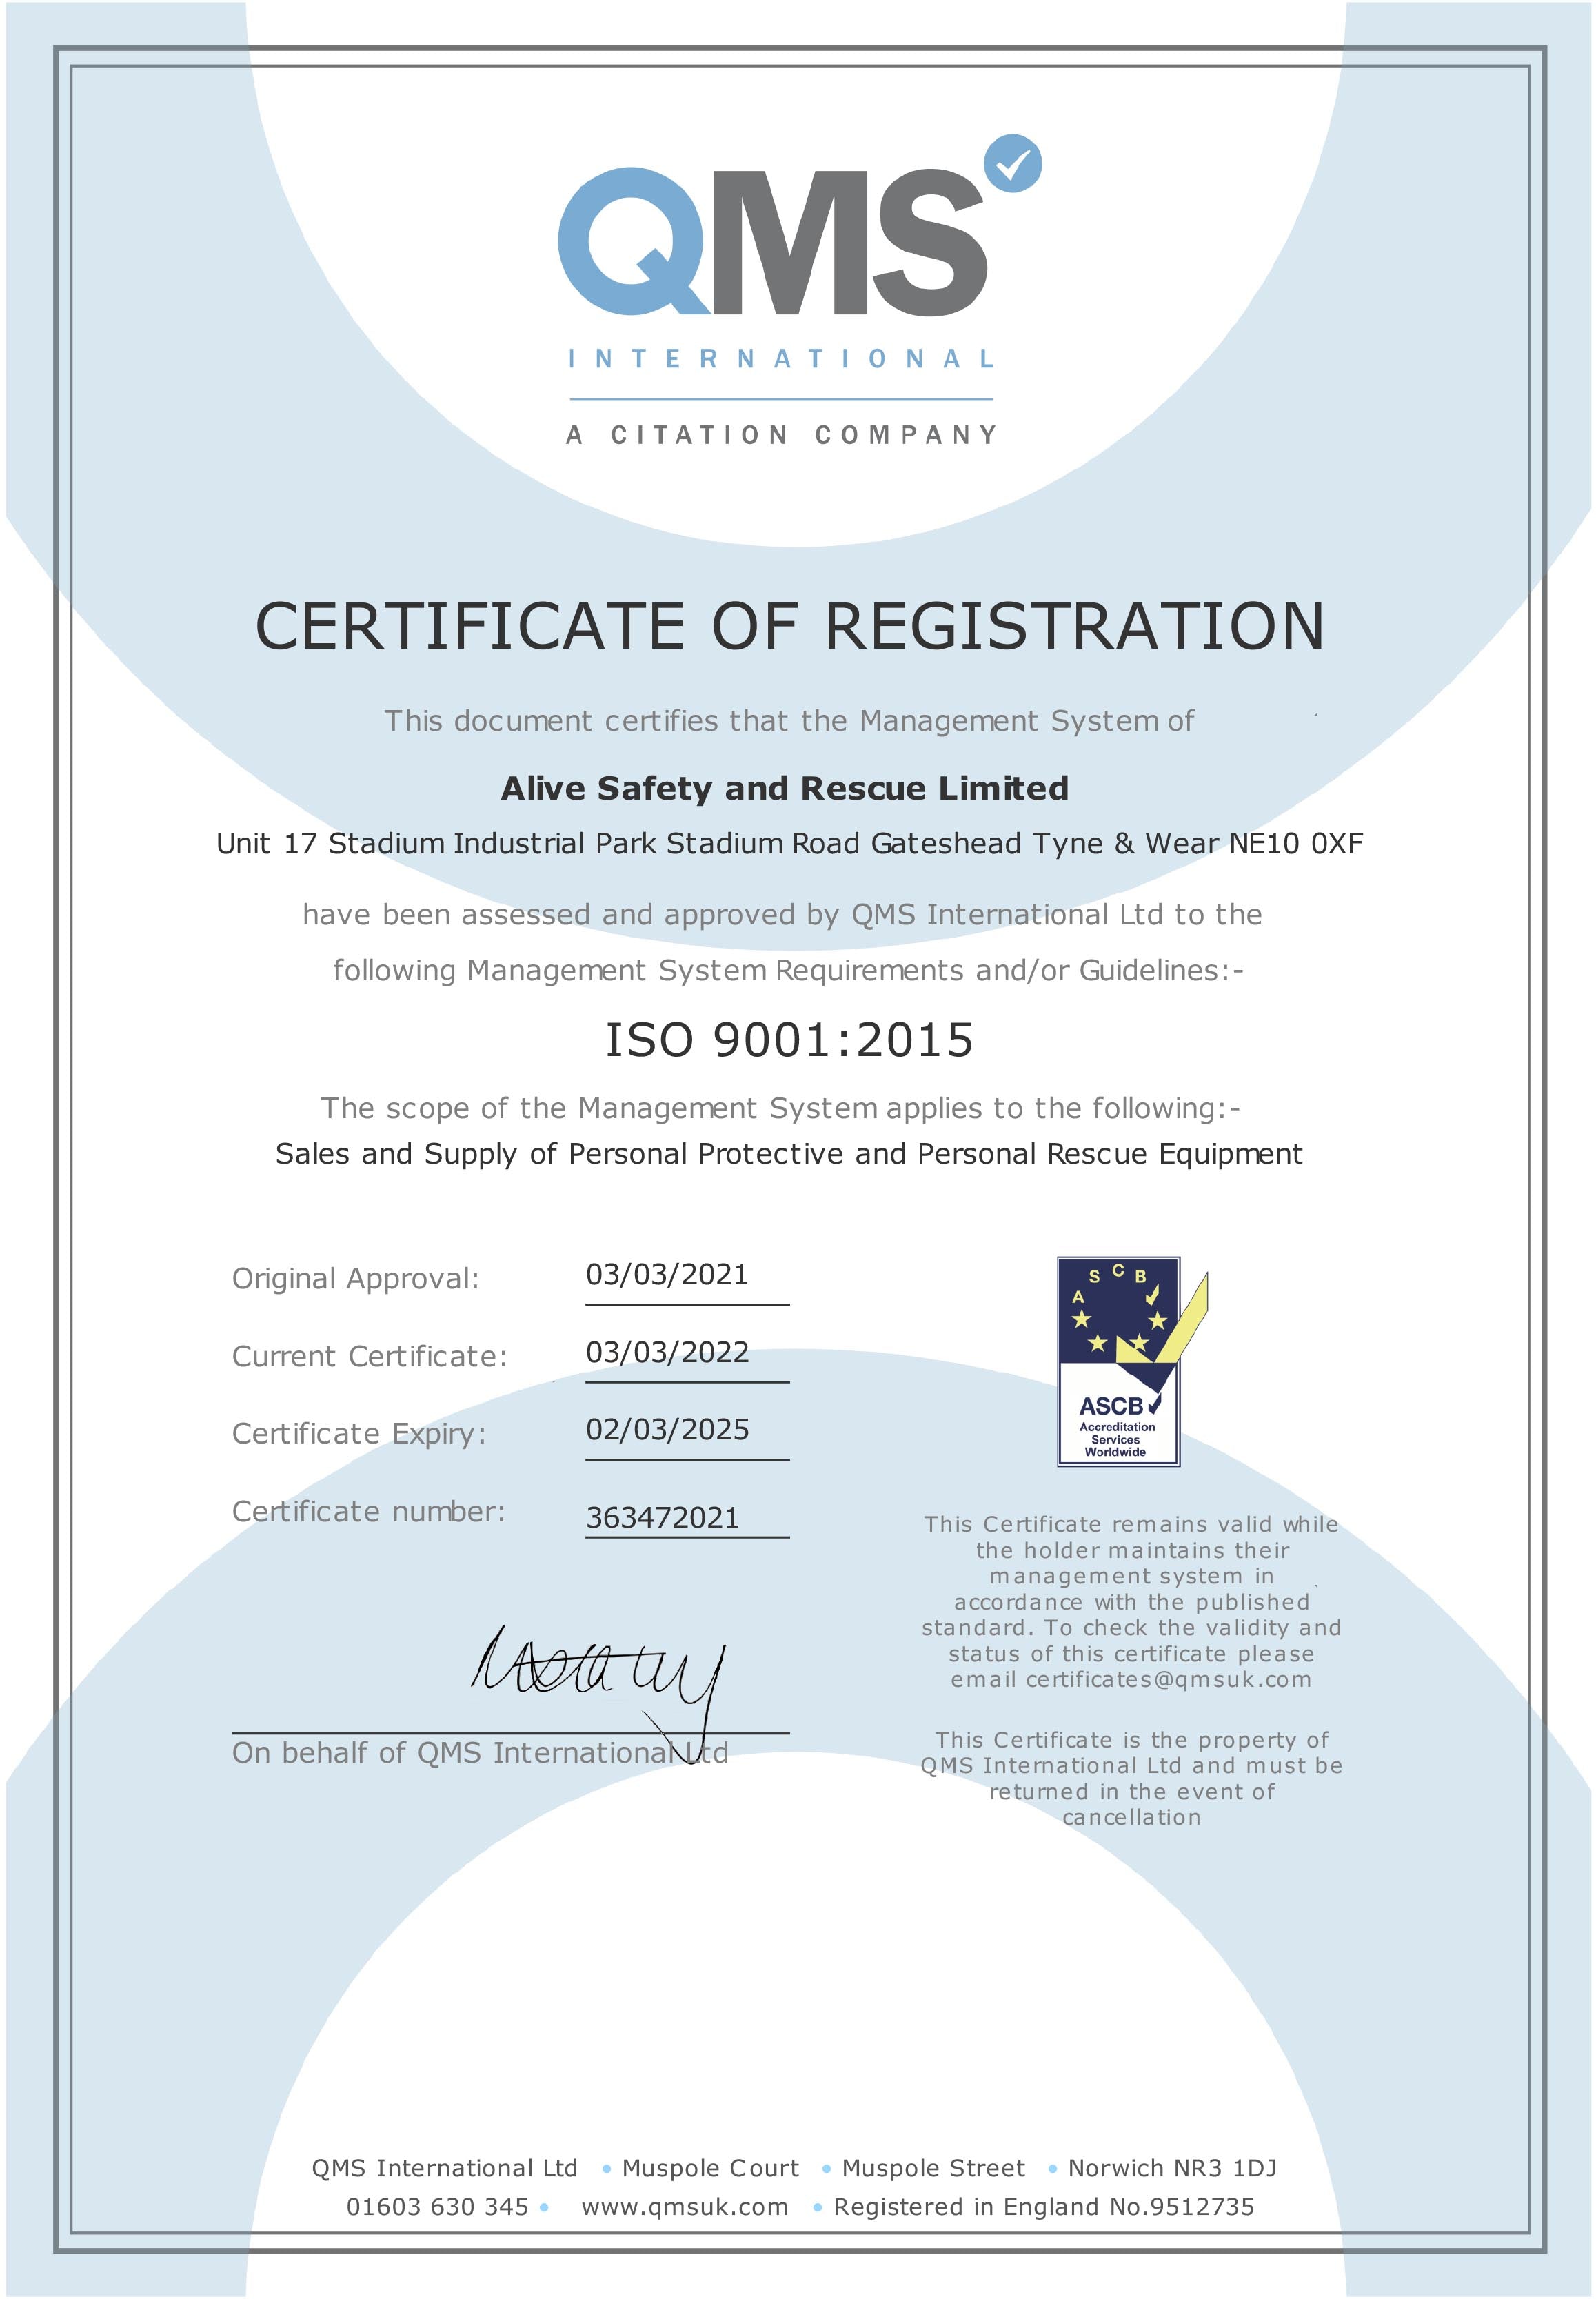 Alive Safety & Rescue Ltd ISO 9001 2015 Certification